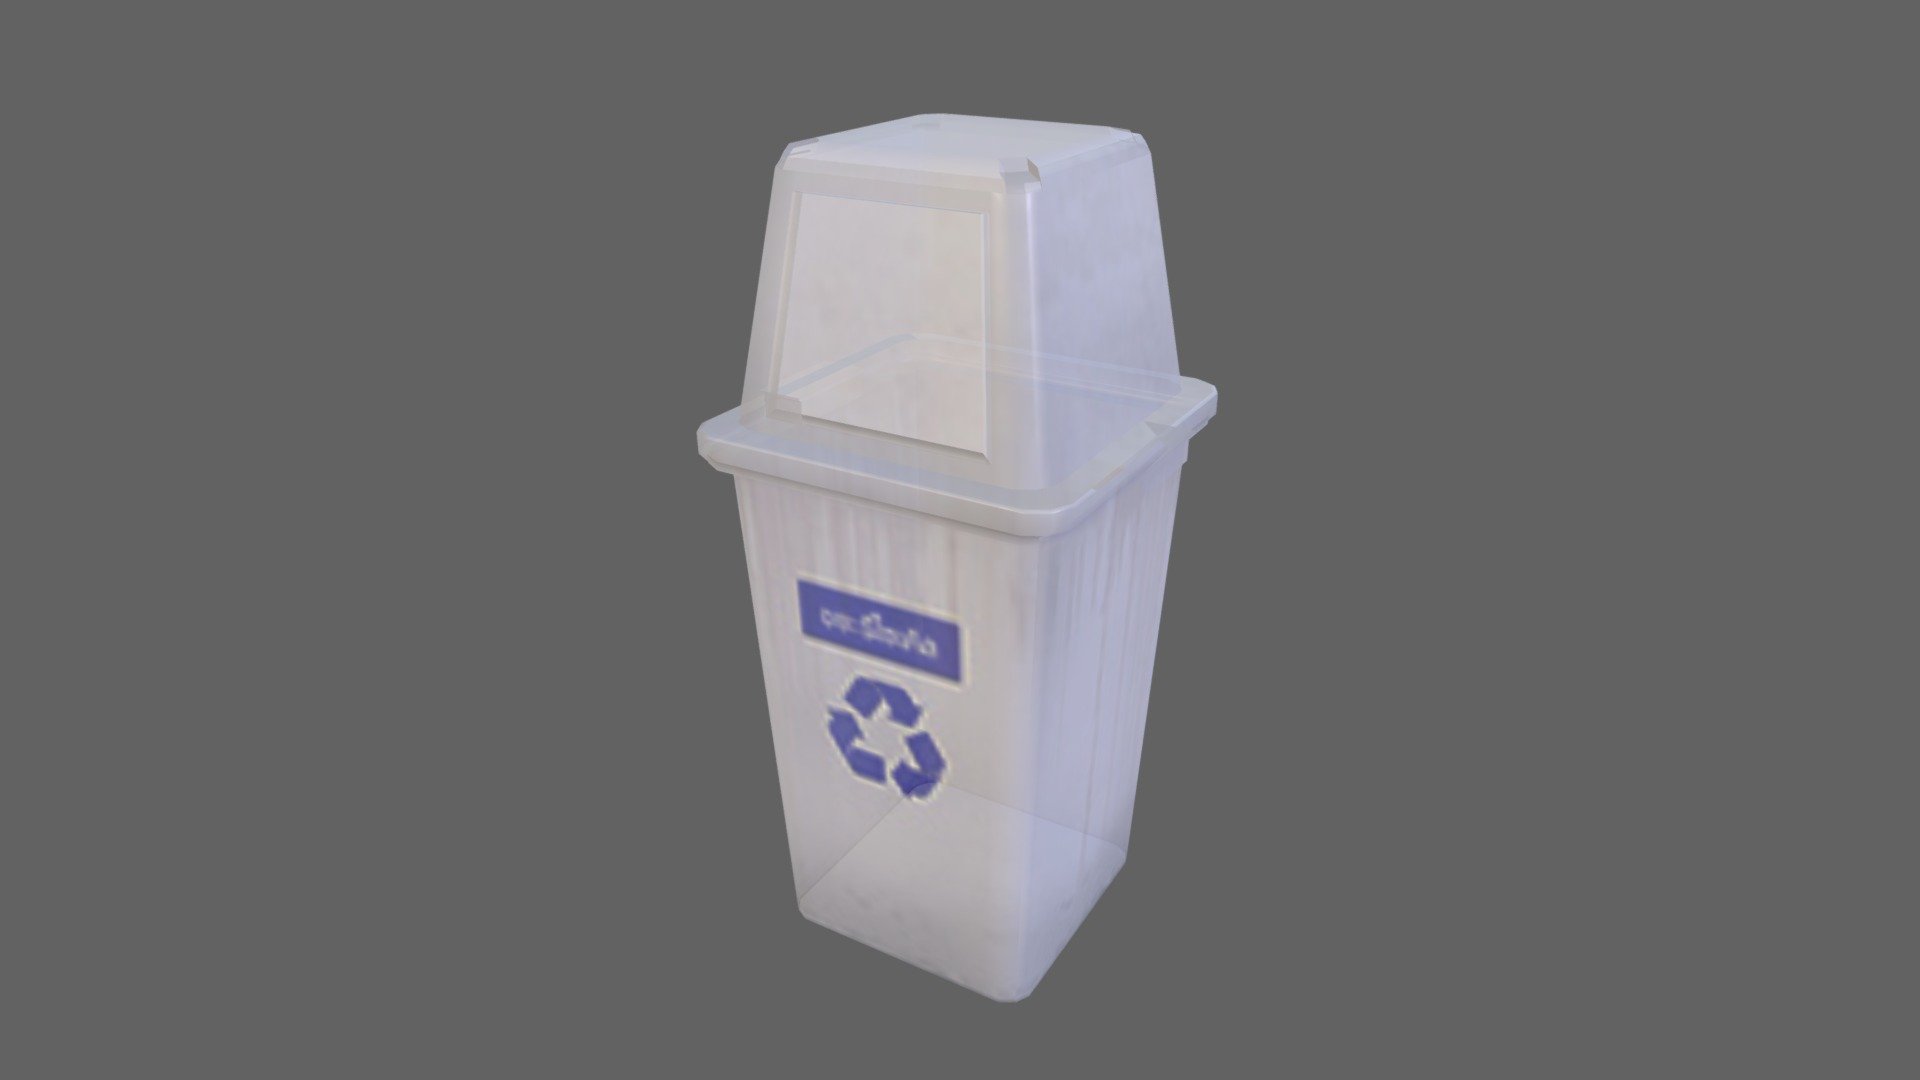 Bin low poly model

Bin low poly model

Poly: 530
Vertex: 270
in subdivision level 0

256x256 JPG Texture - Low Poly Bin - 3D model by MadAssets 3d model